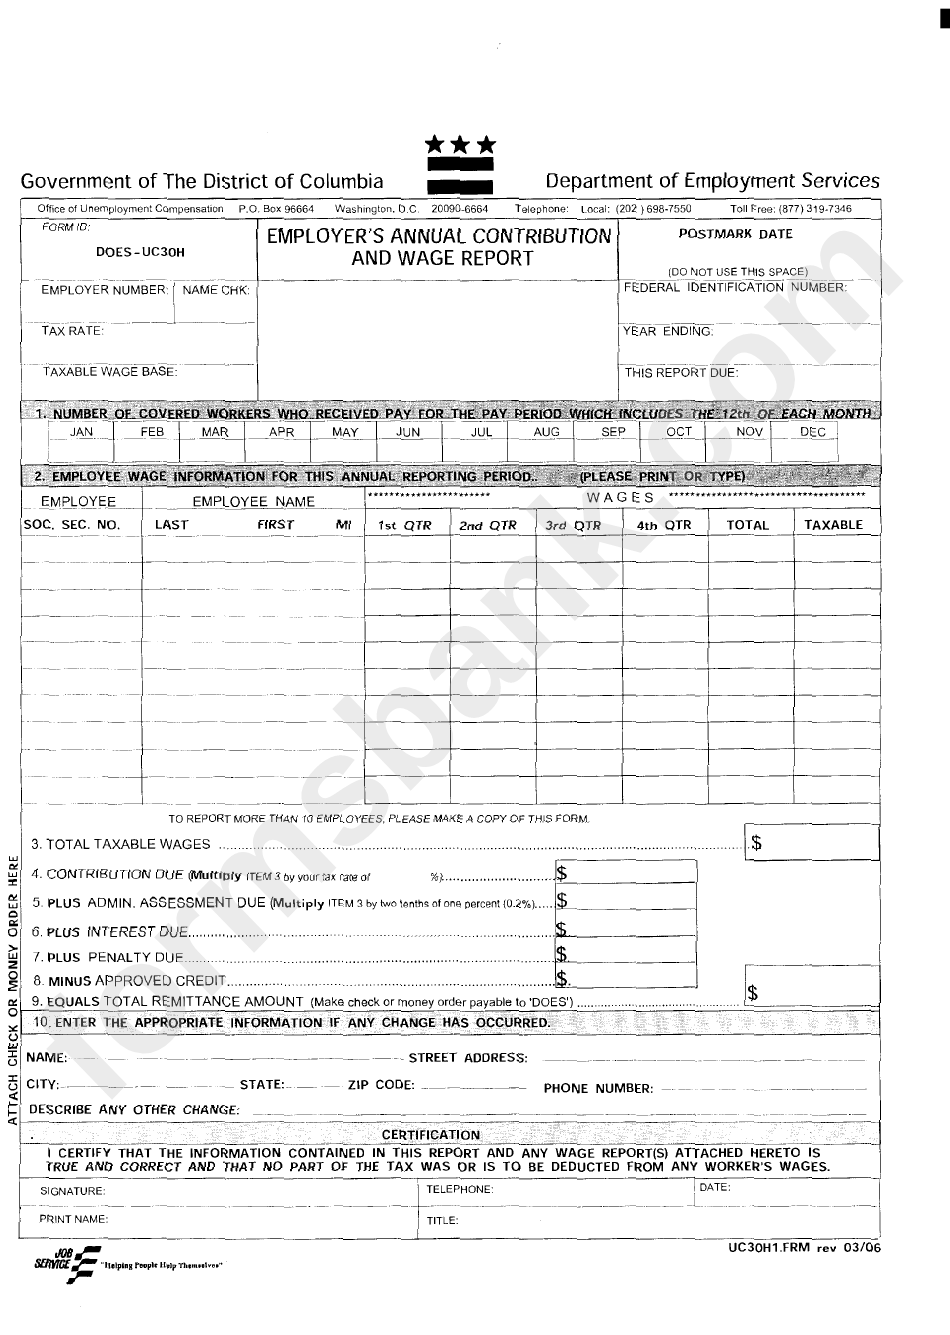 Form Does-Uc3oh - Employer